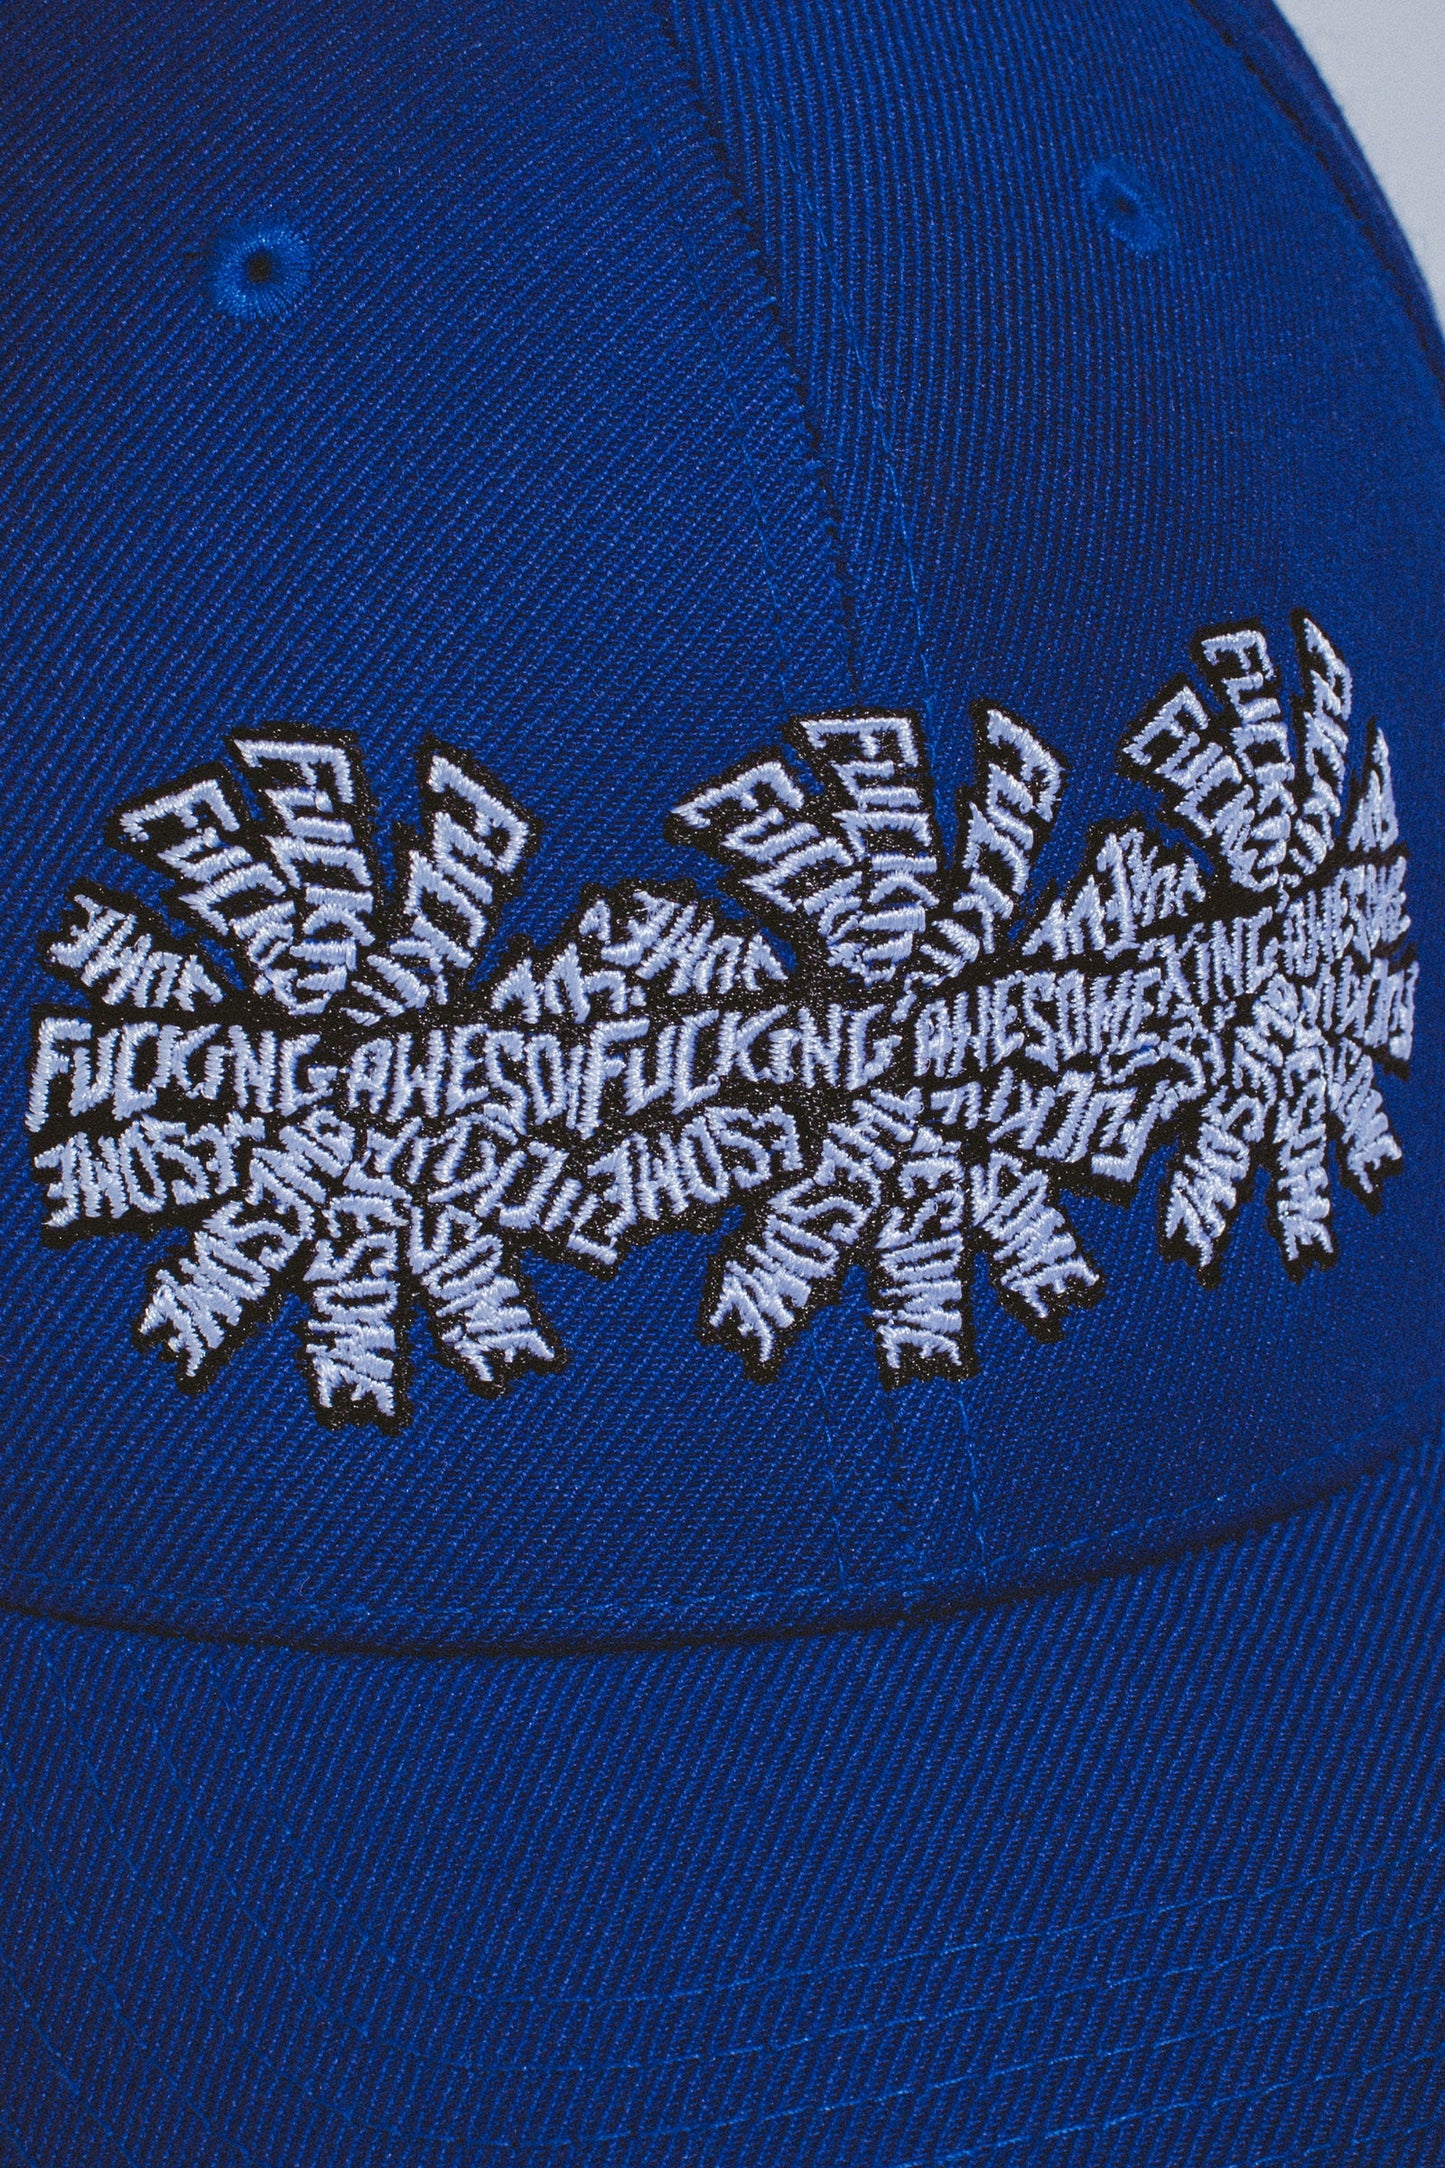 Fucking Awesome 3 Spiral Embroidered Snapback Royal